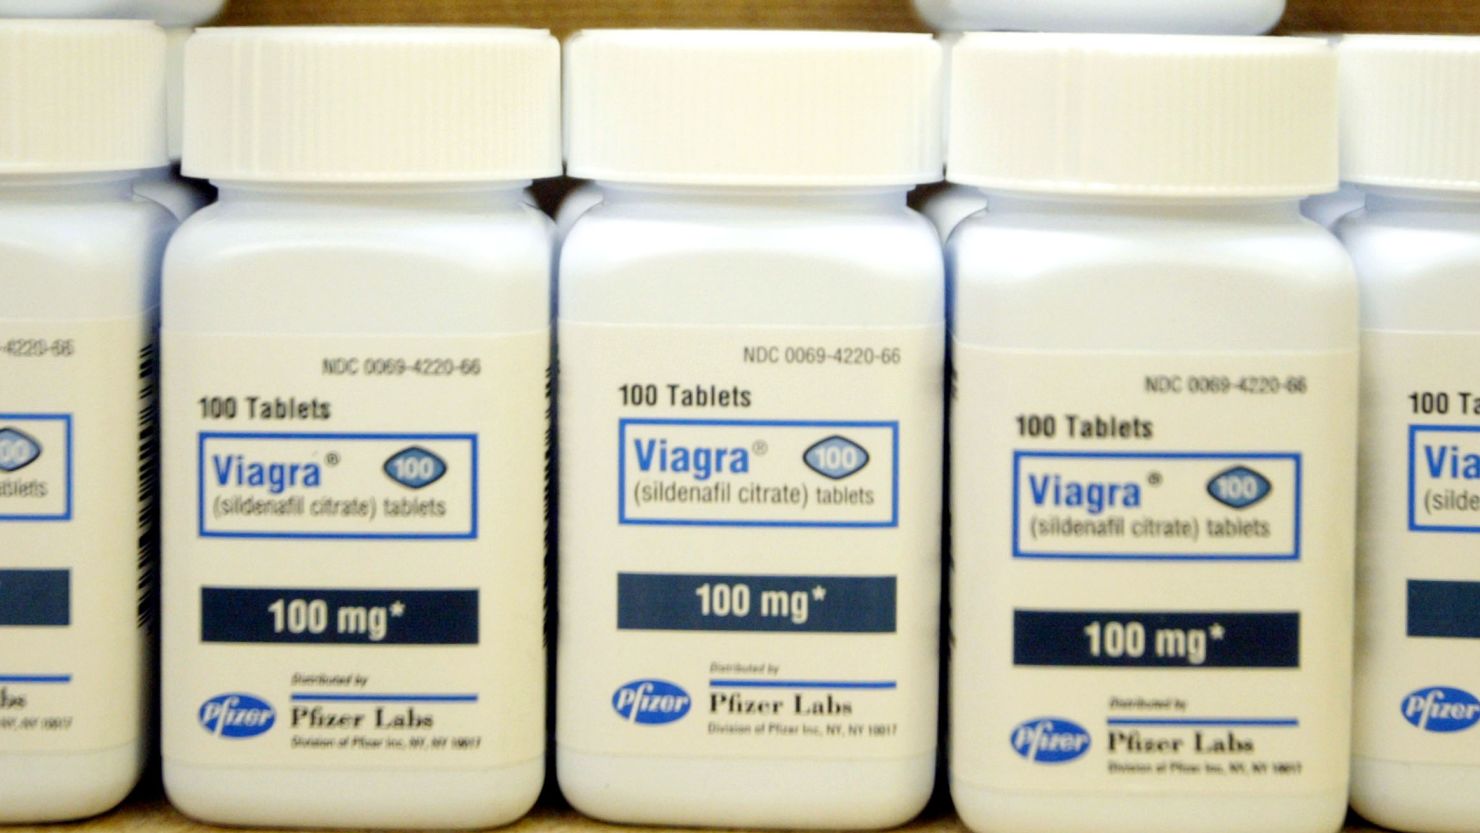 A German court has ruled that insurers don't have to pay for for Viagra or other sexual performance enhancing drugs.